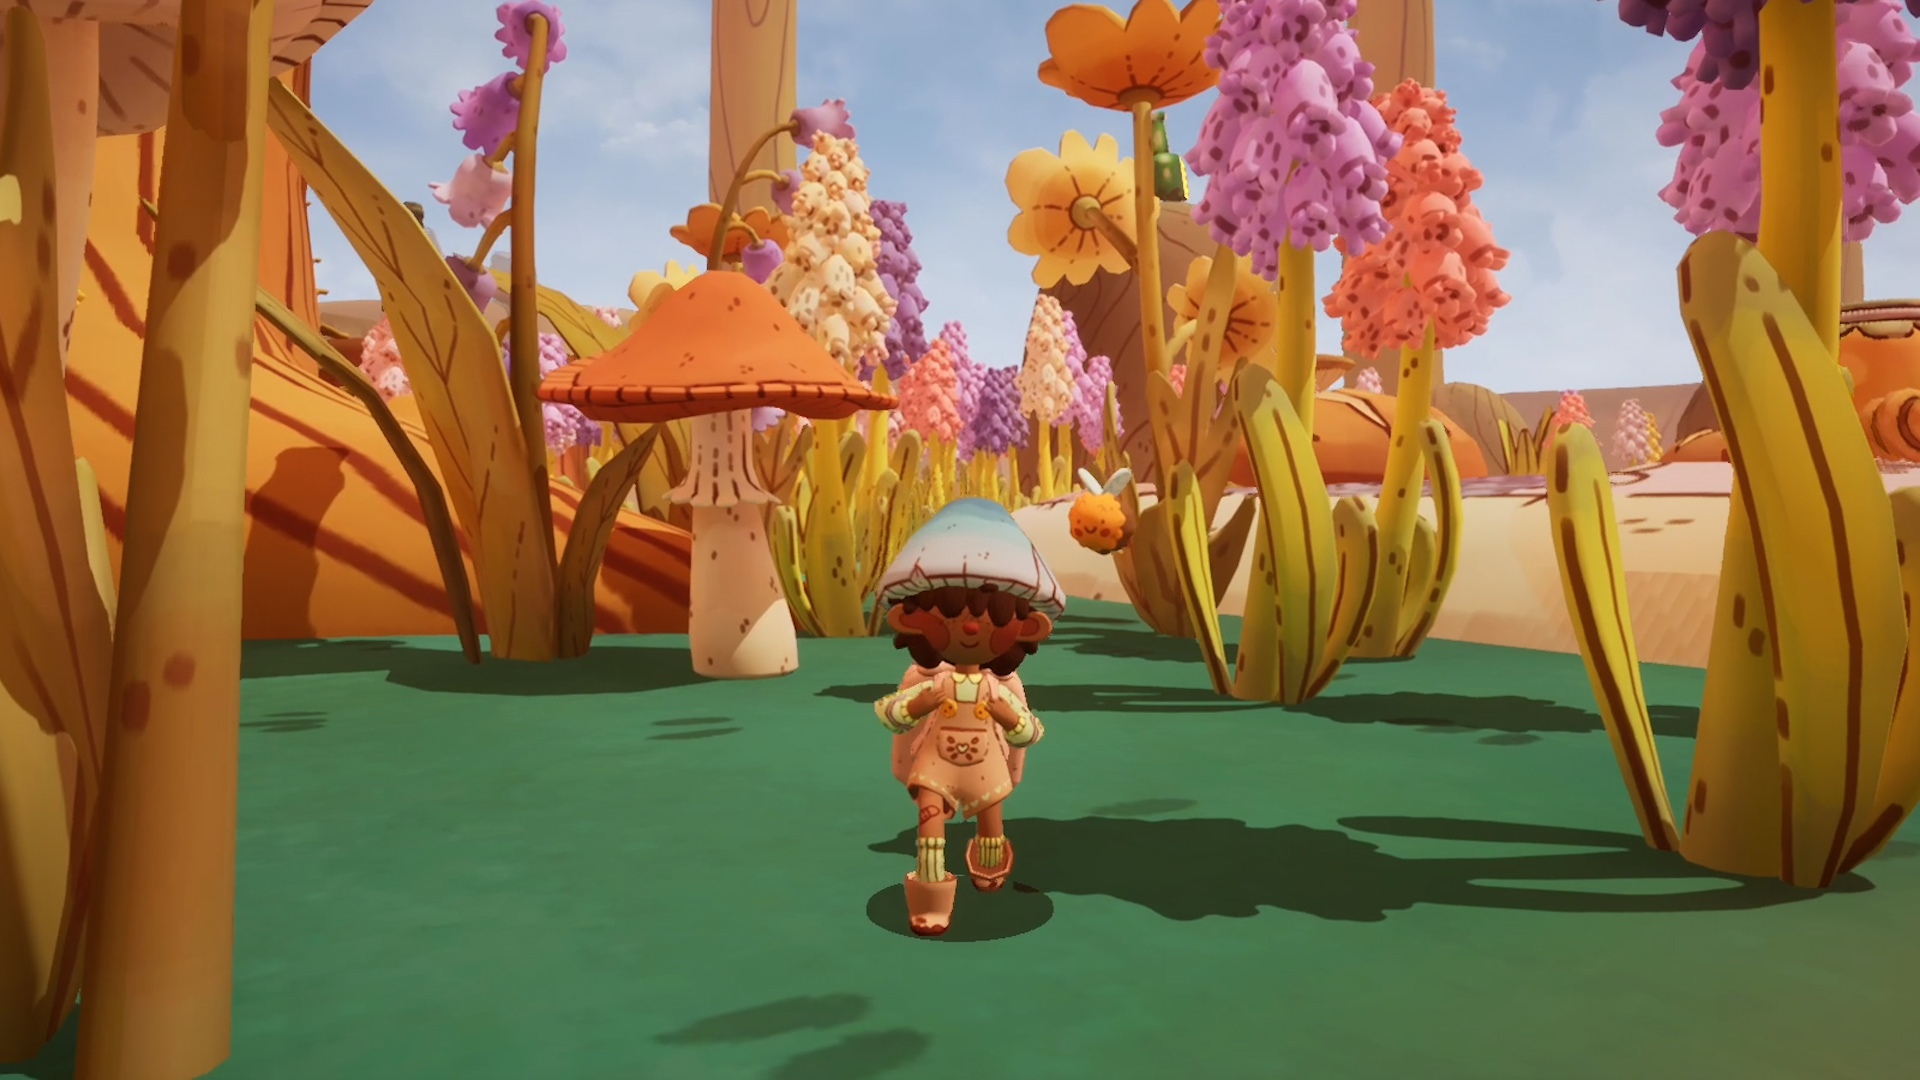 A small mushroom hat wearing mail carrier explores a forest floor from the perspective of a smaller creature with flowers towering above